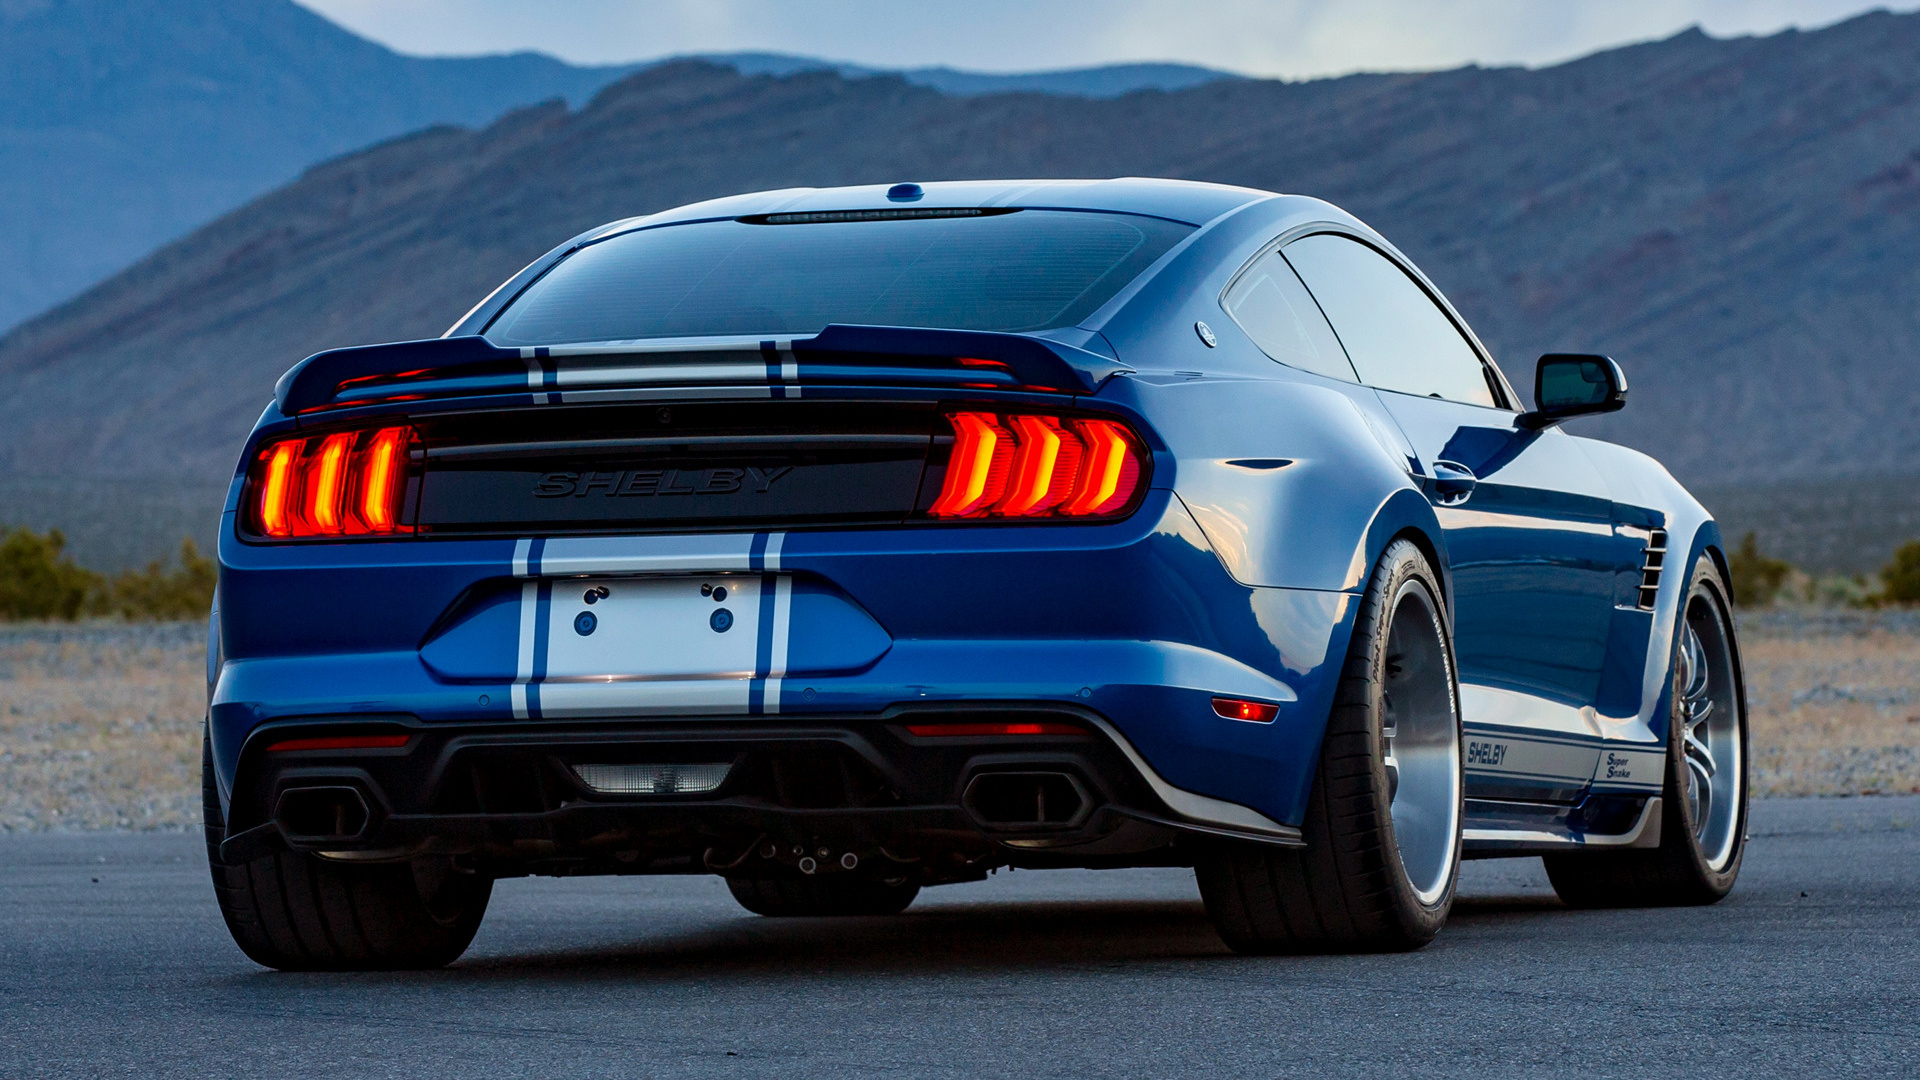  Shelby Super Snake Widebody Cellphone FHD pic